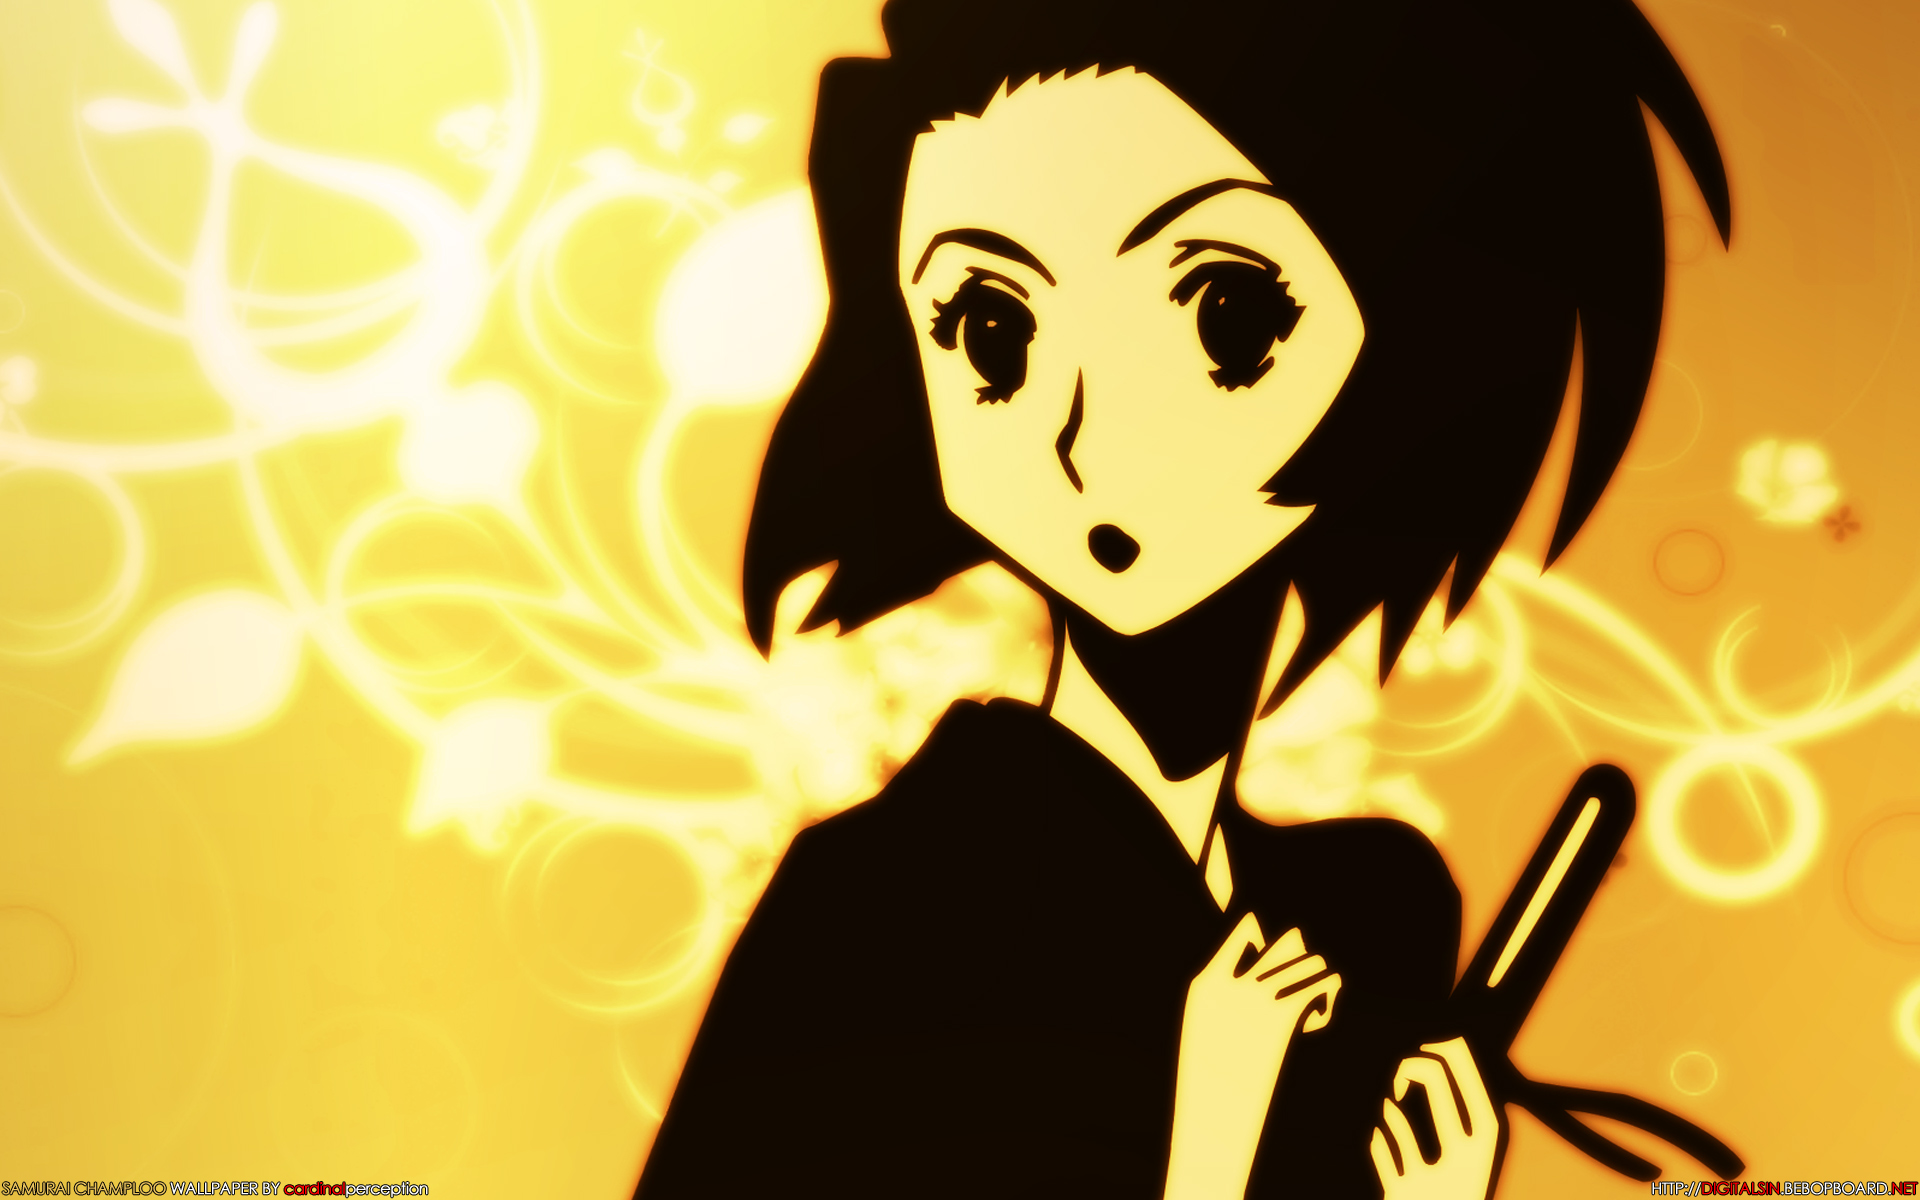 Anime-inspired wallpaper featuring characters from Samurai Champloo.